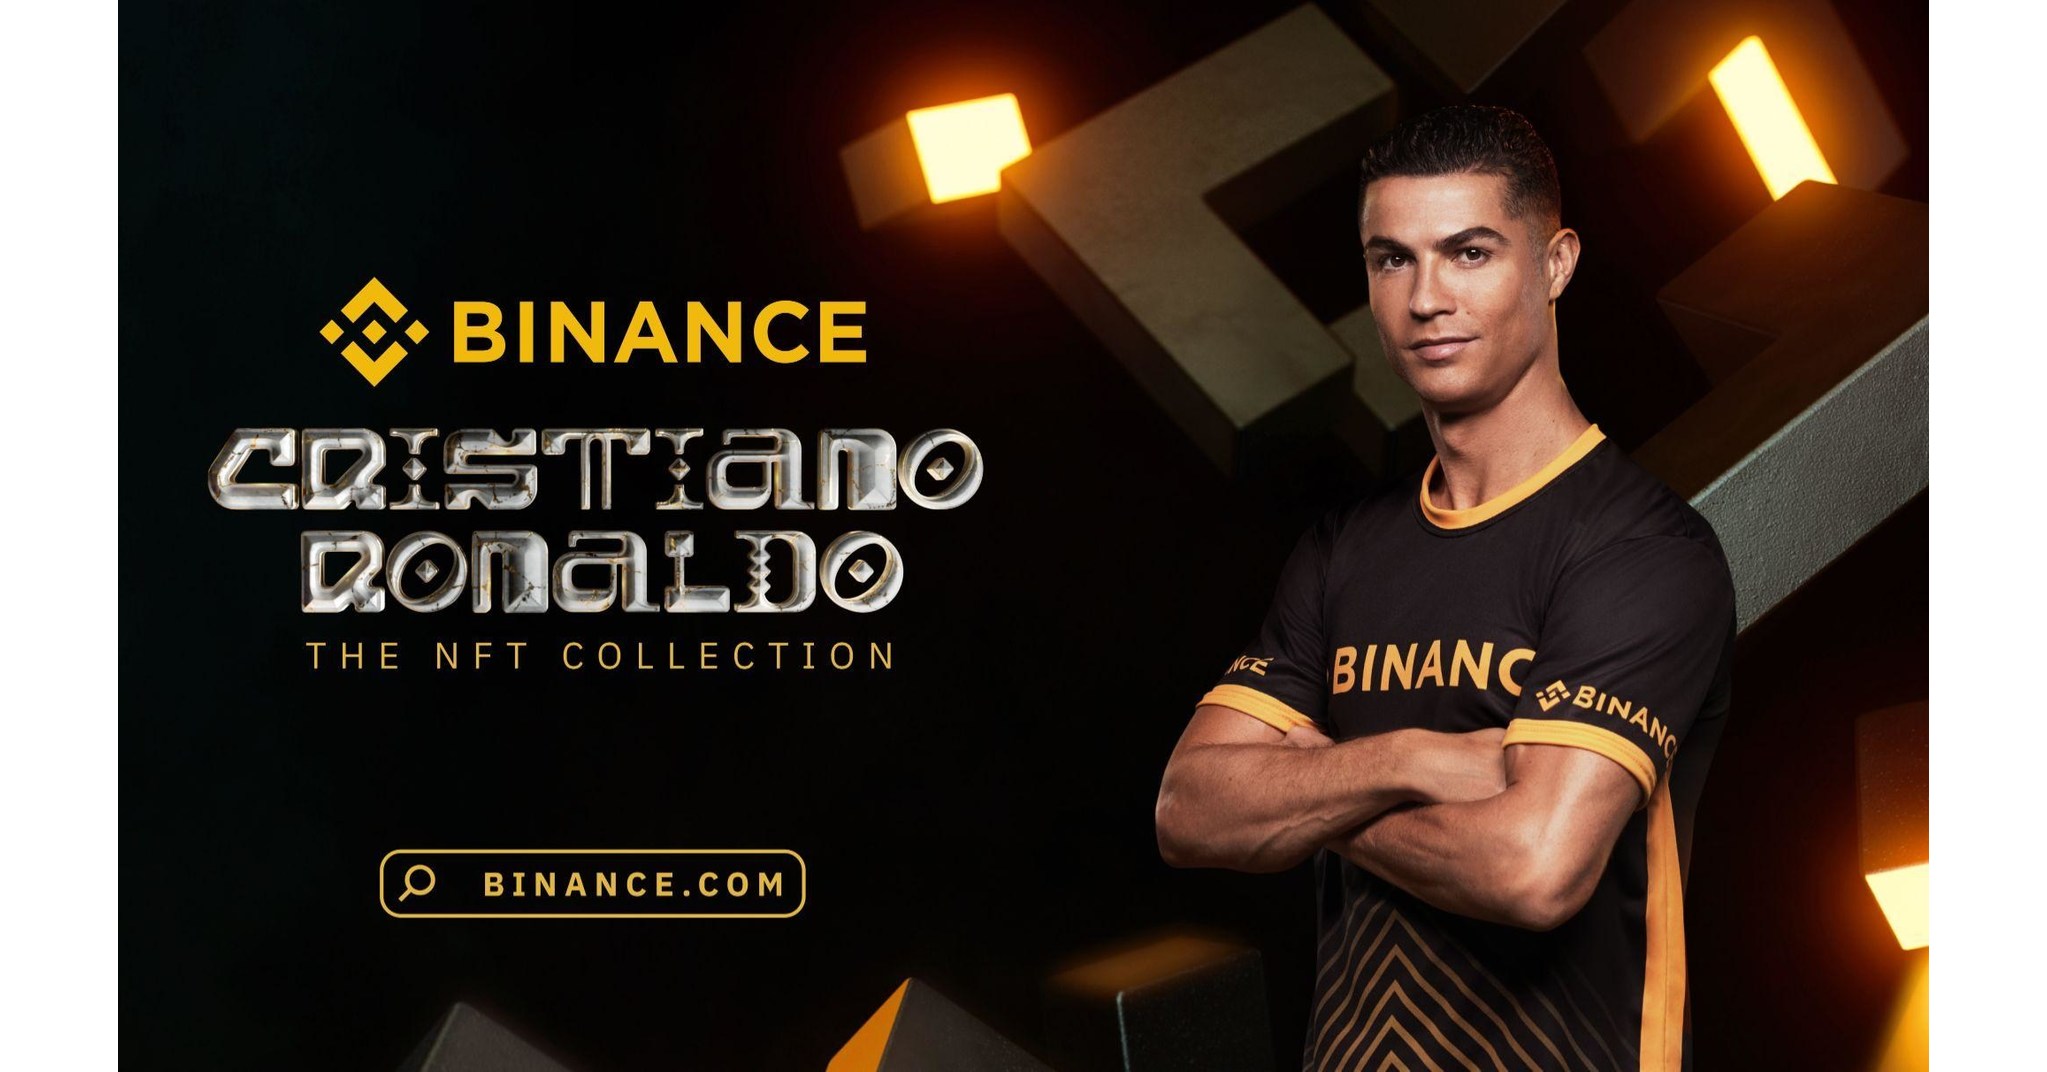 Christiano Ronaldo faces legal Challenges over Binance Promotion - ecobt.ru Blog